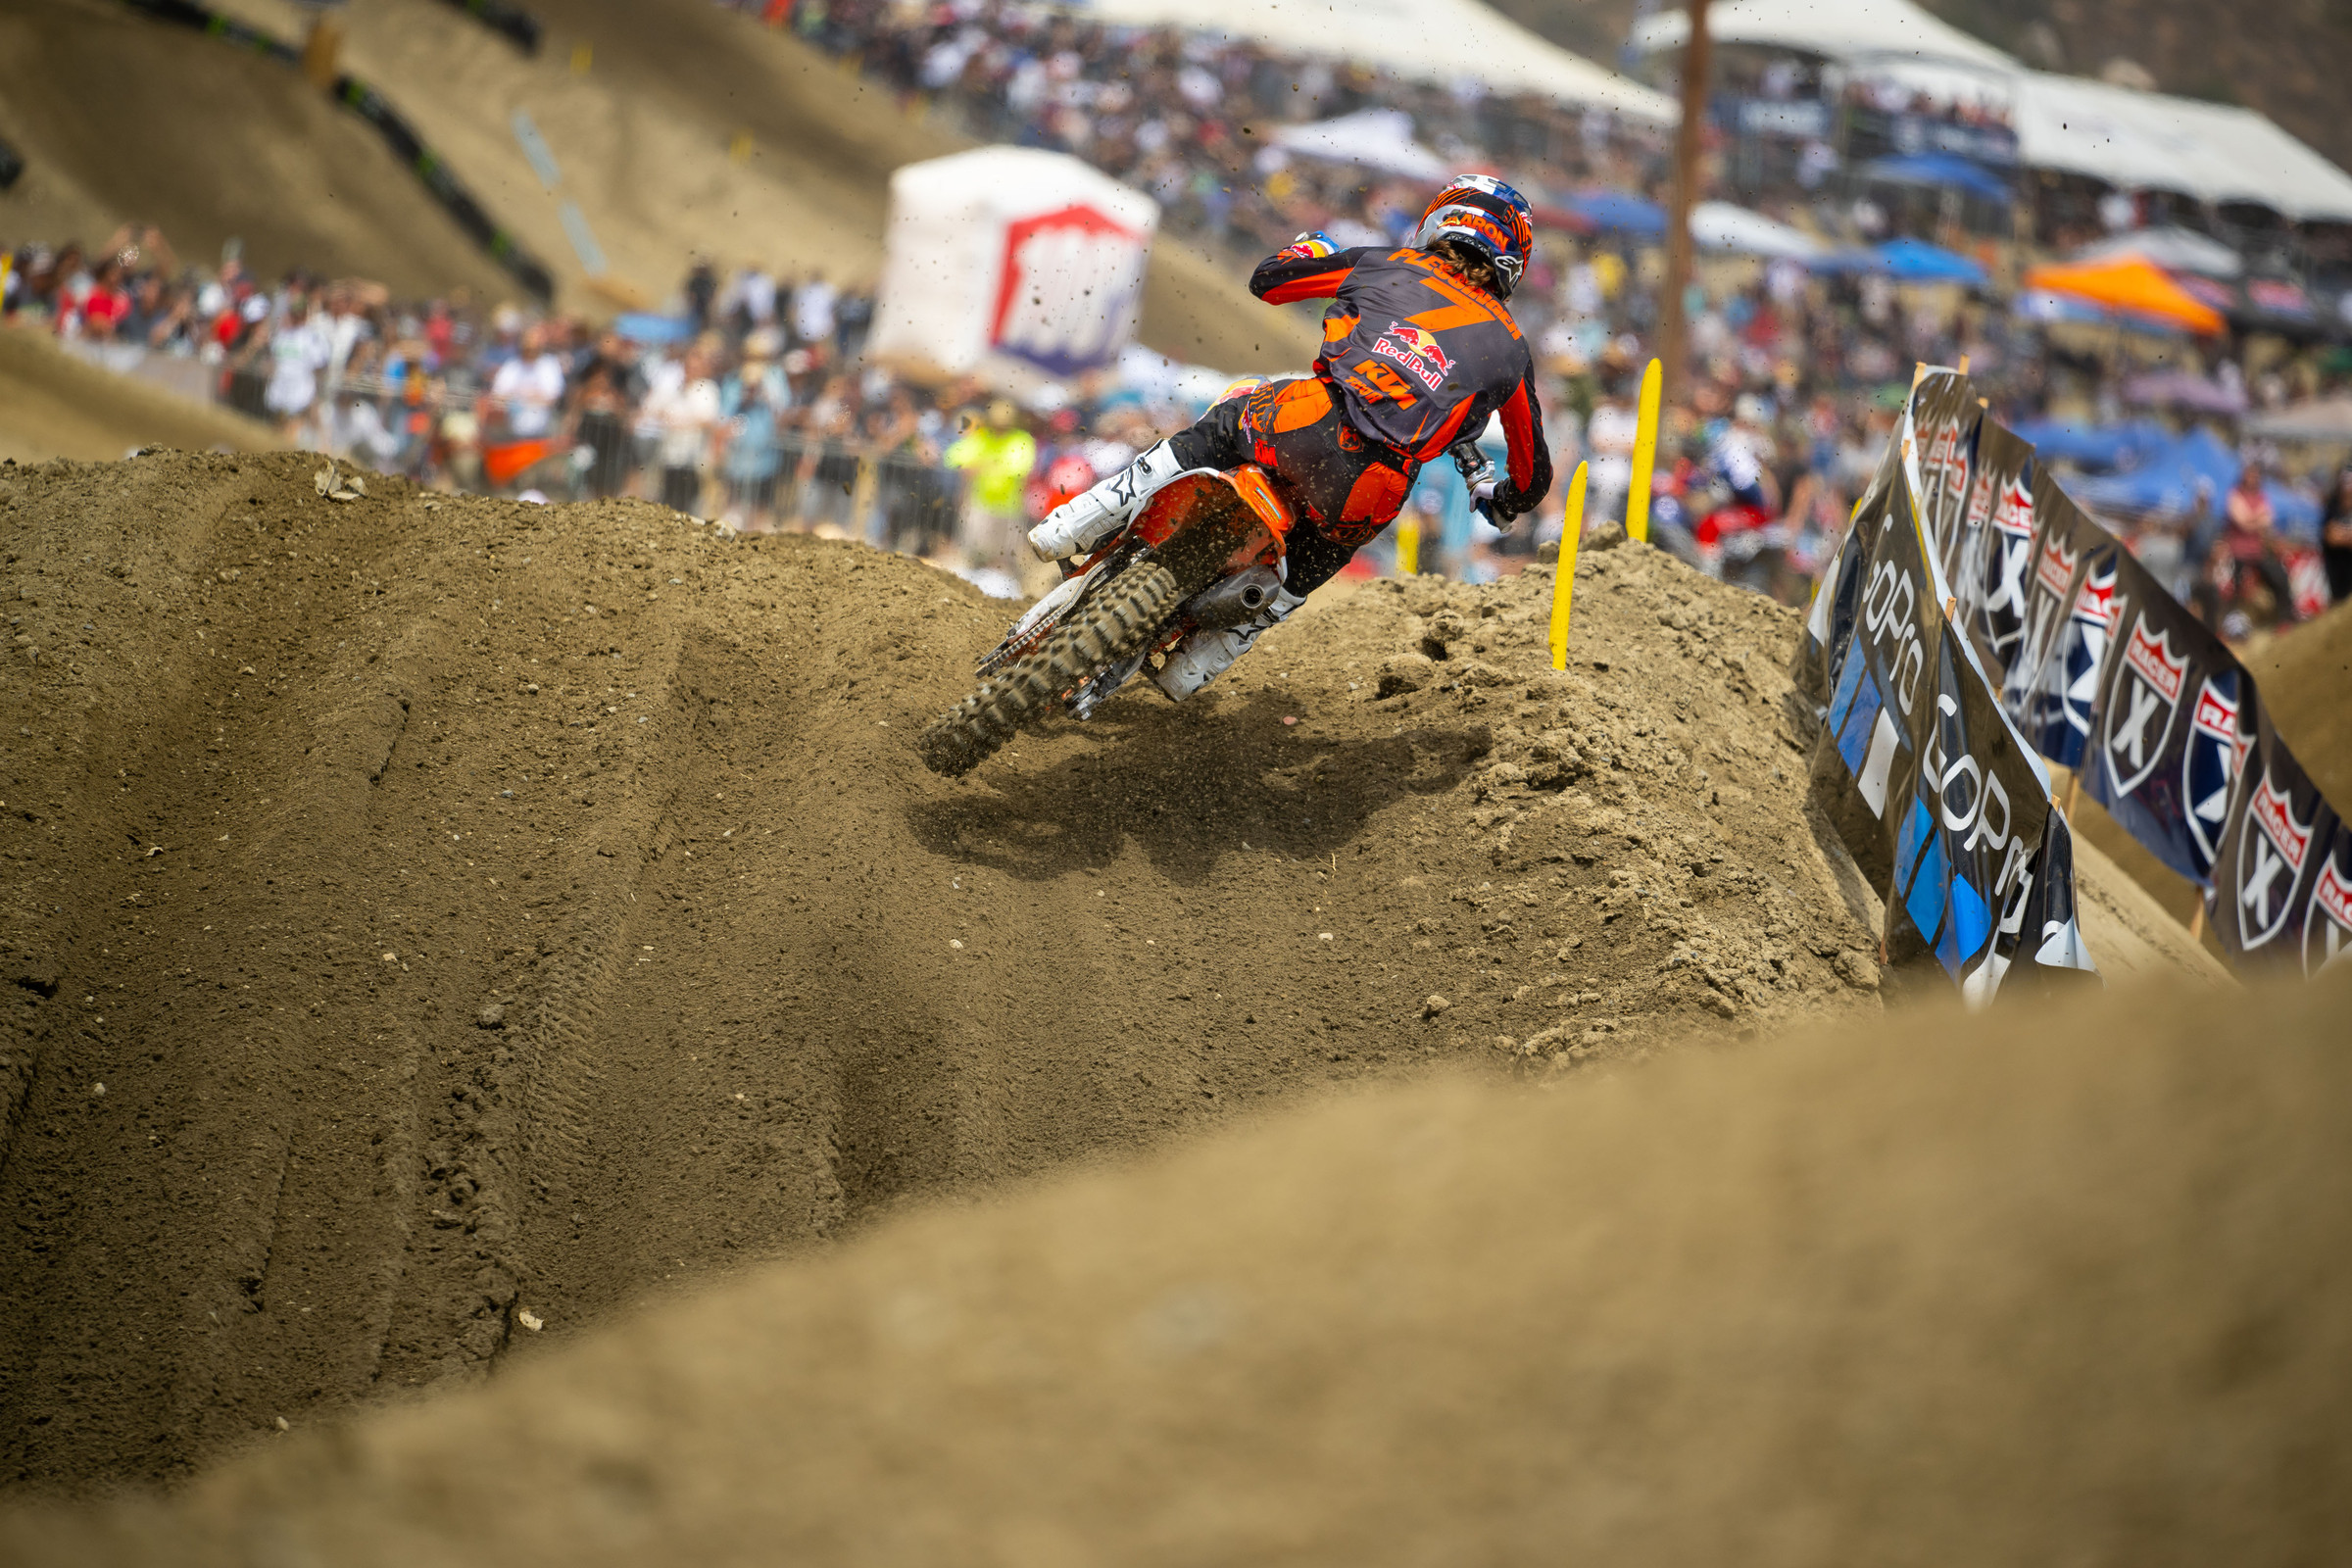 How to Watch/Stream Hangtown, Mason-Dixon GNCC, and MXGP of France on TV